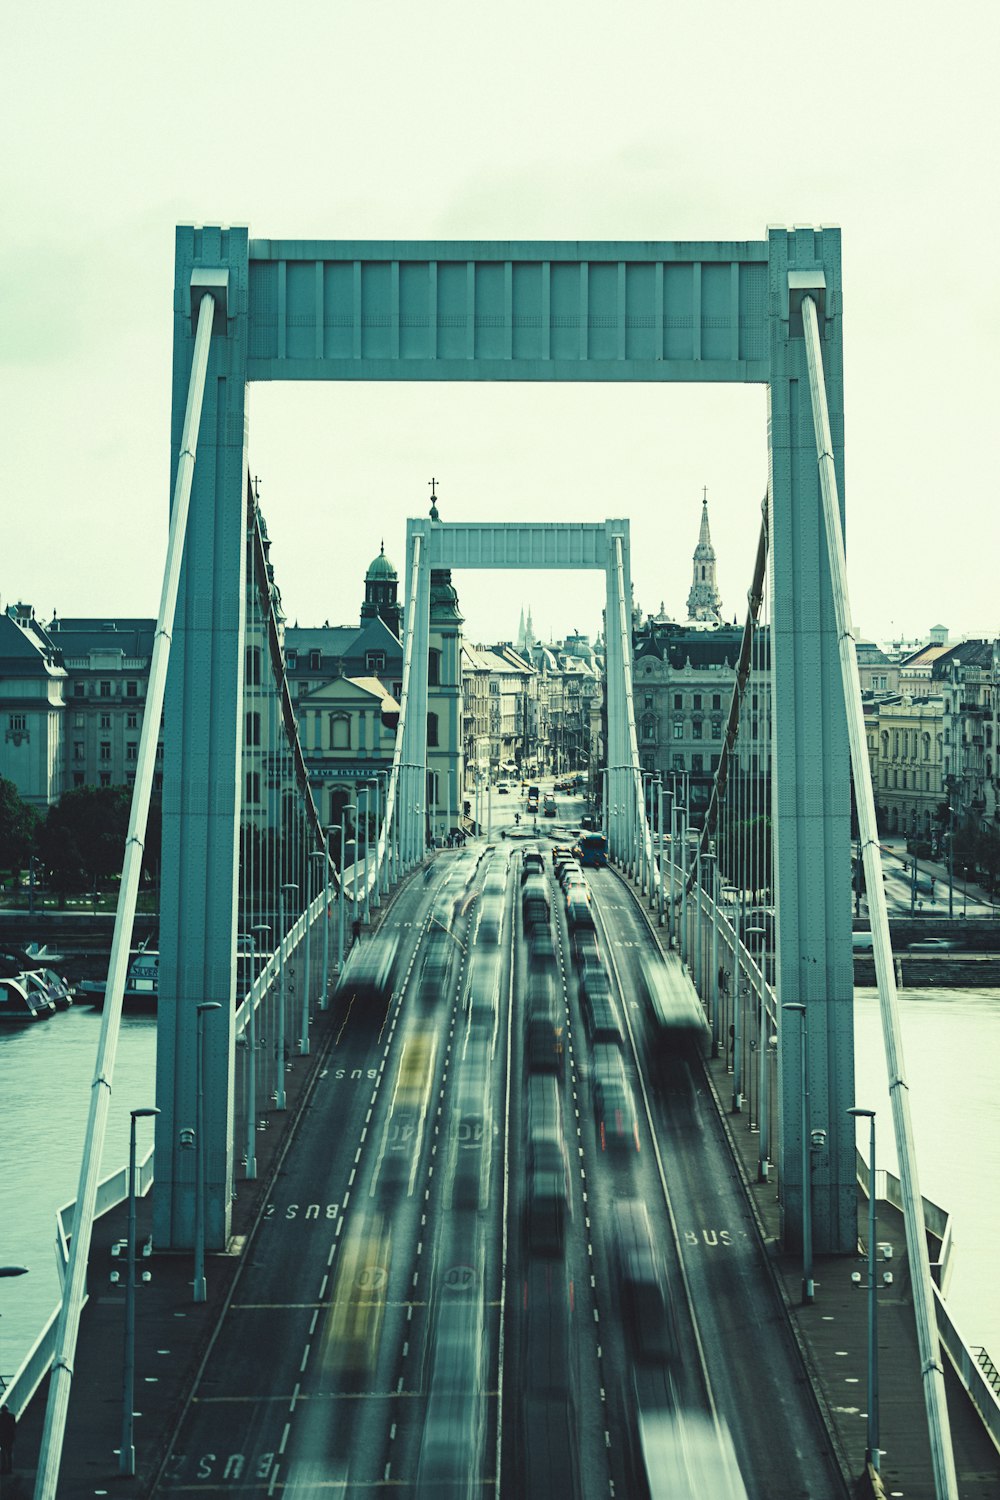 a view of a bridge with cars going over it